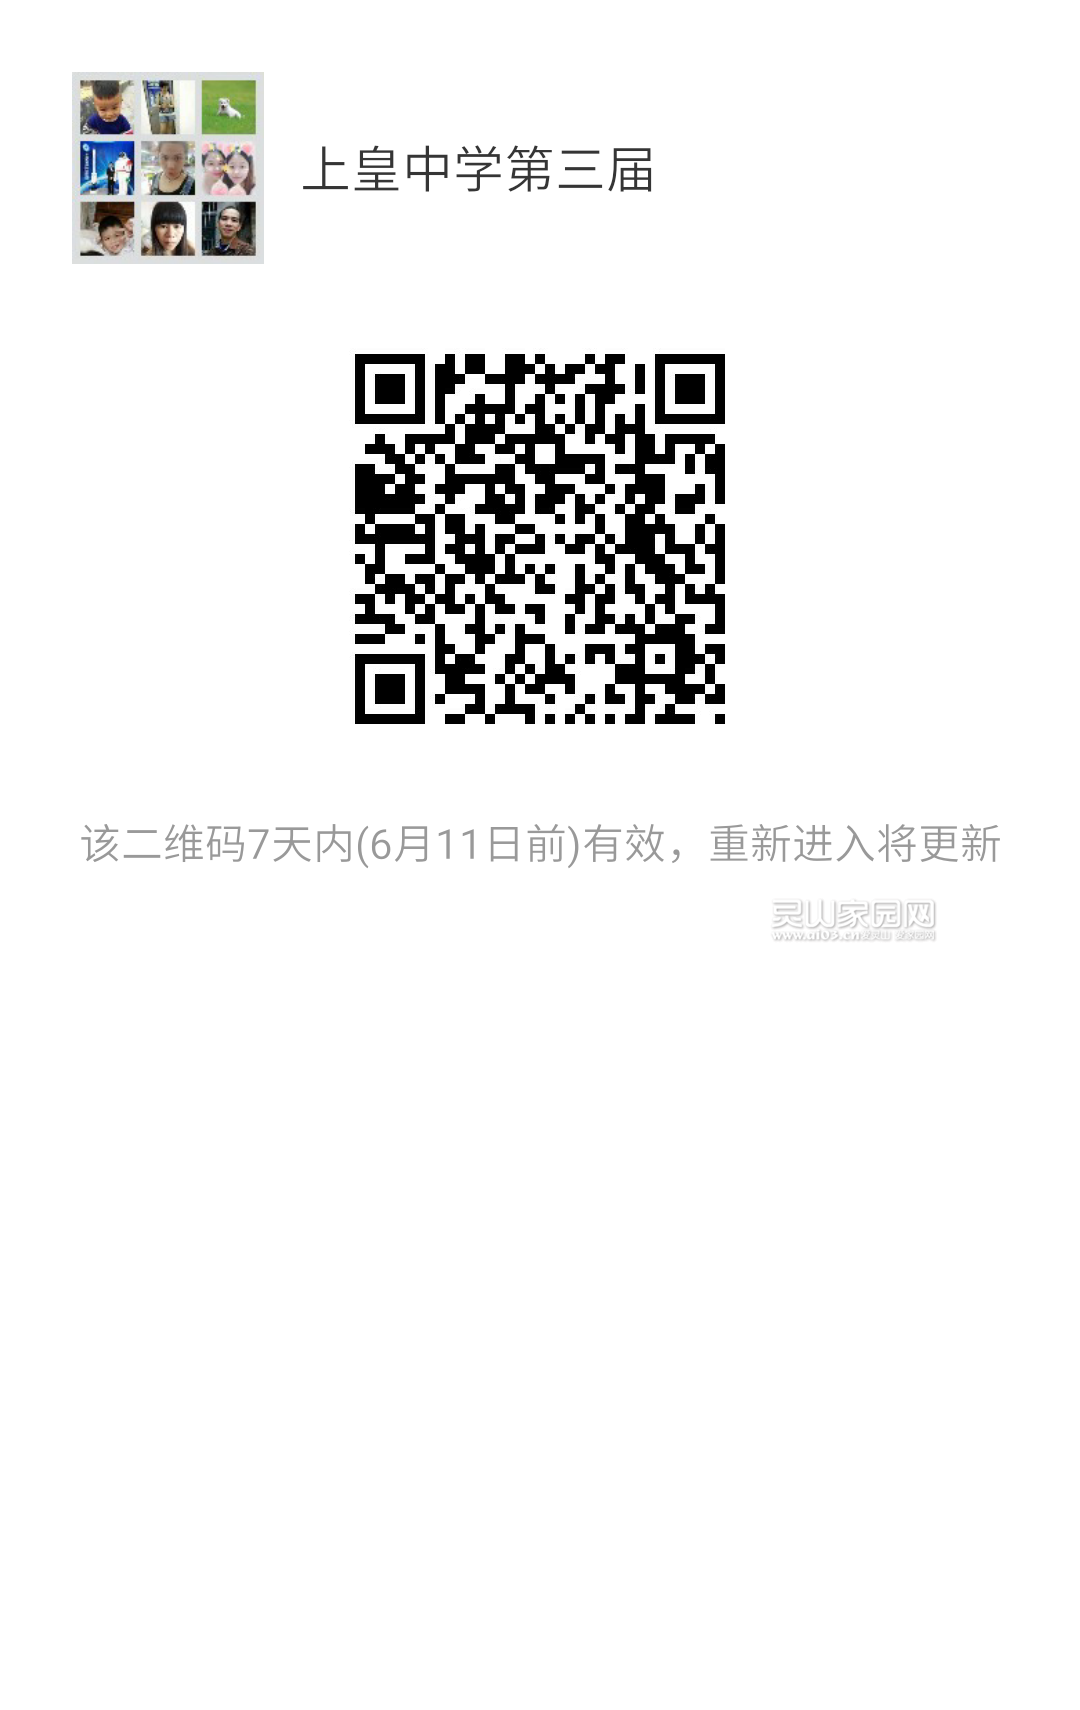 mmqrcode1496563579473.png